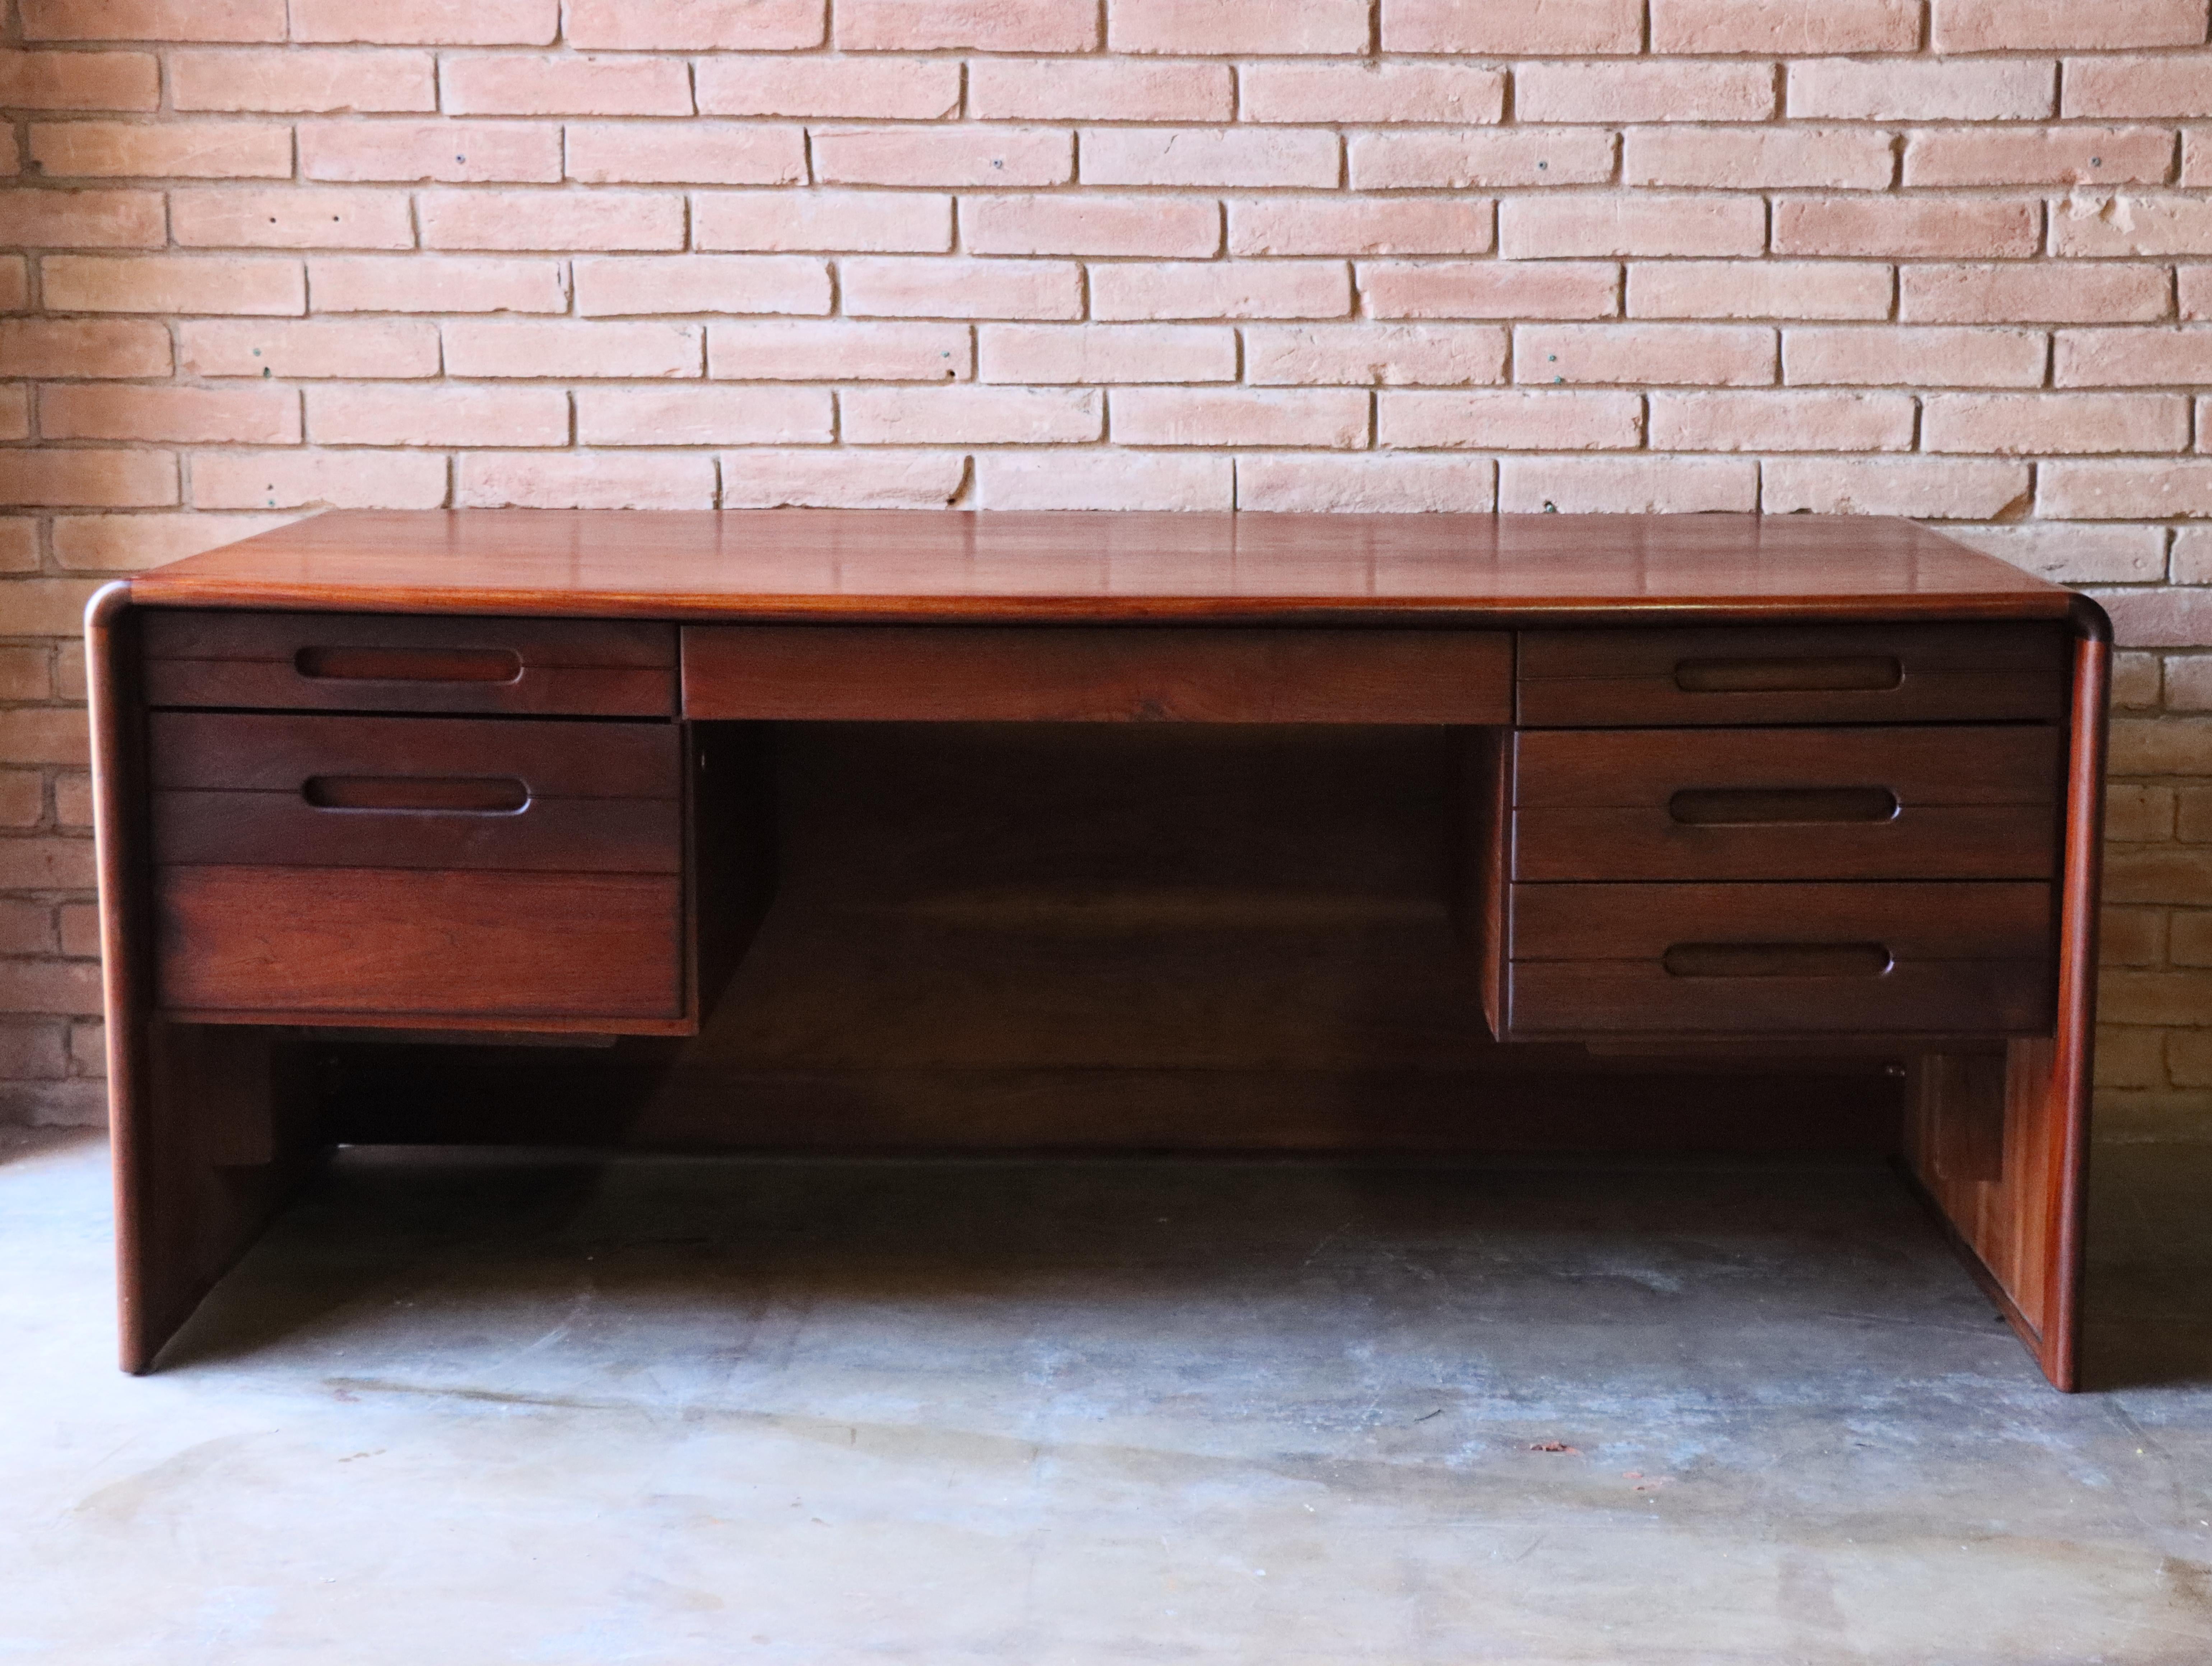 Solid Walnut and Burlwood Desk by Lou Hodges, California Design, 1970s For Sale 3